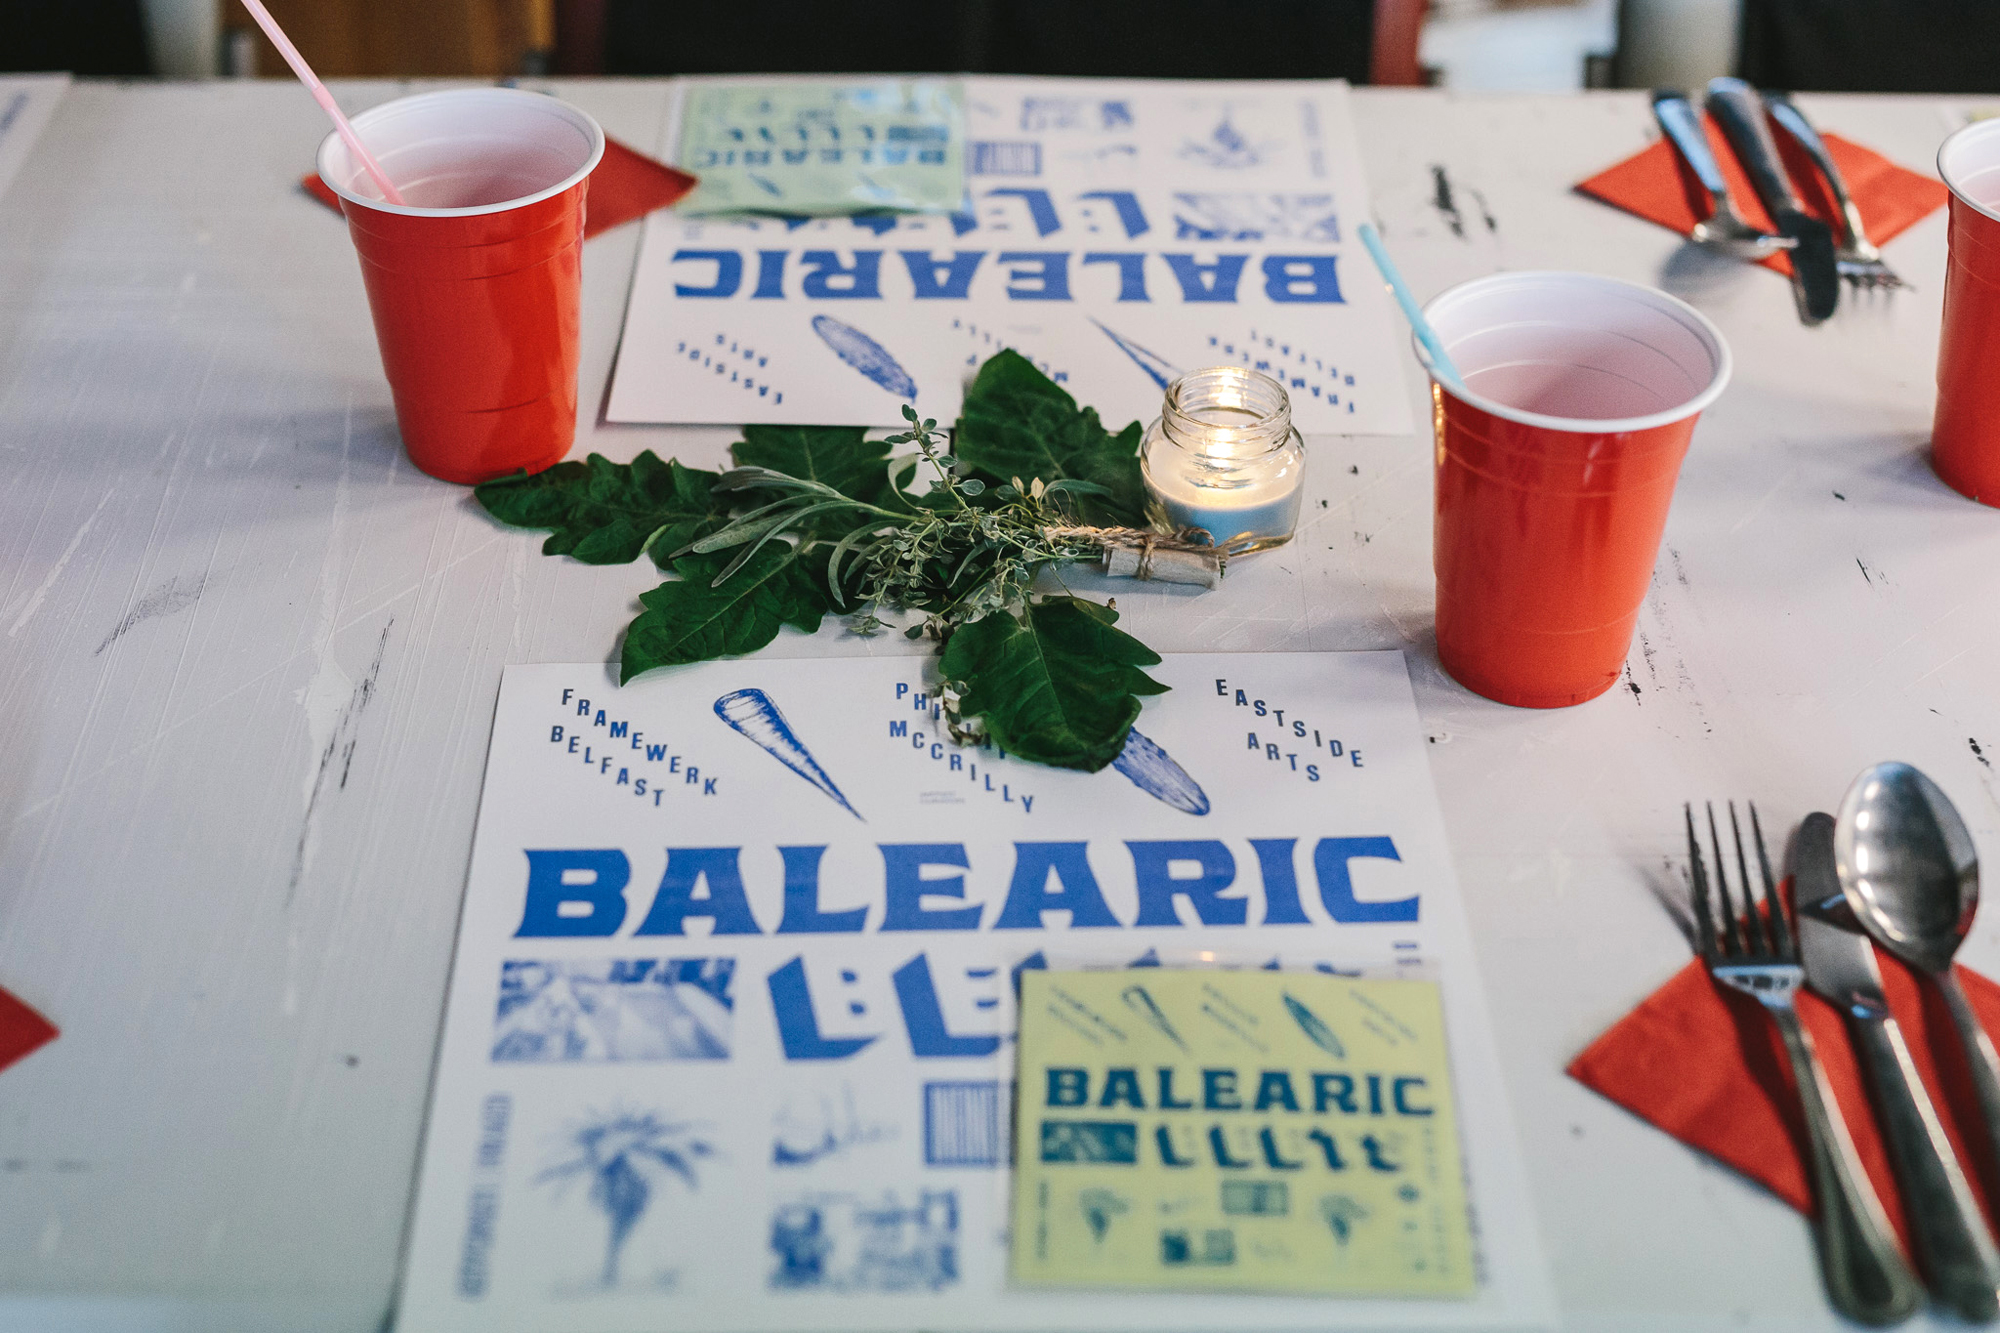 Cover image: Balearic Beets